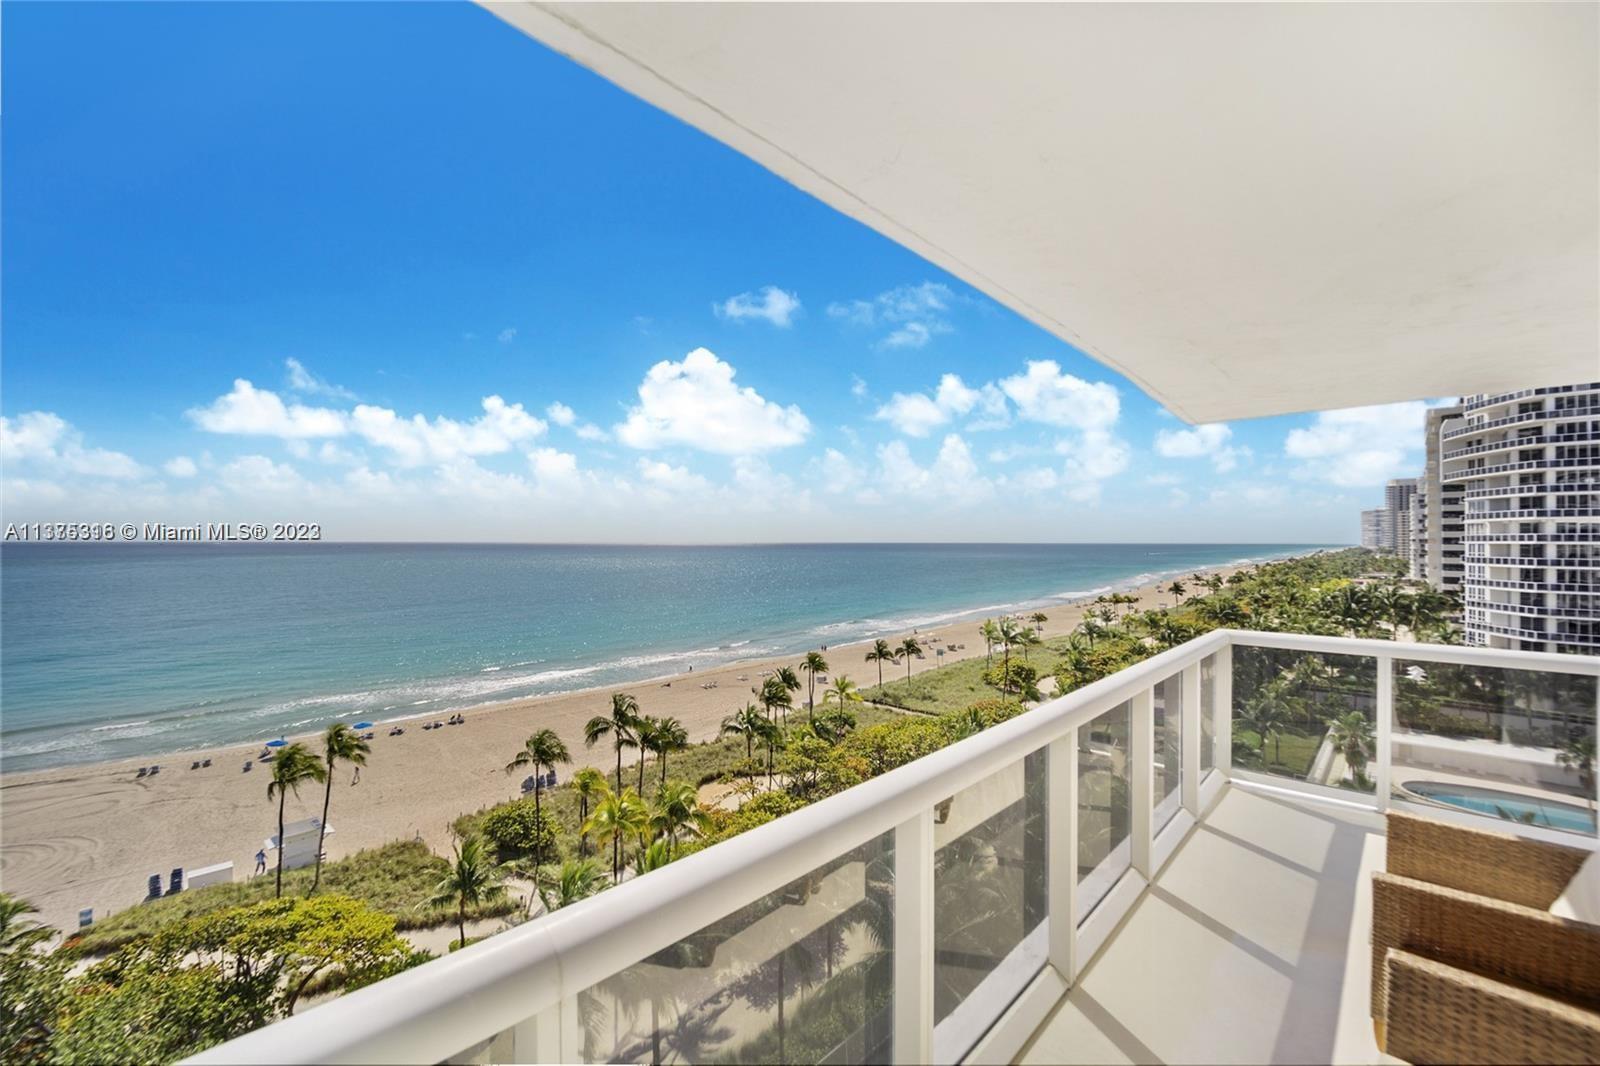 Beautifully furnished and remodeled unit with full ocean views and wrap around balcony. Rarely available unit in most coveted line.